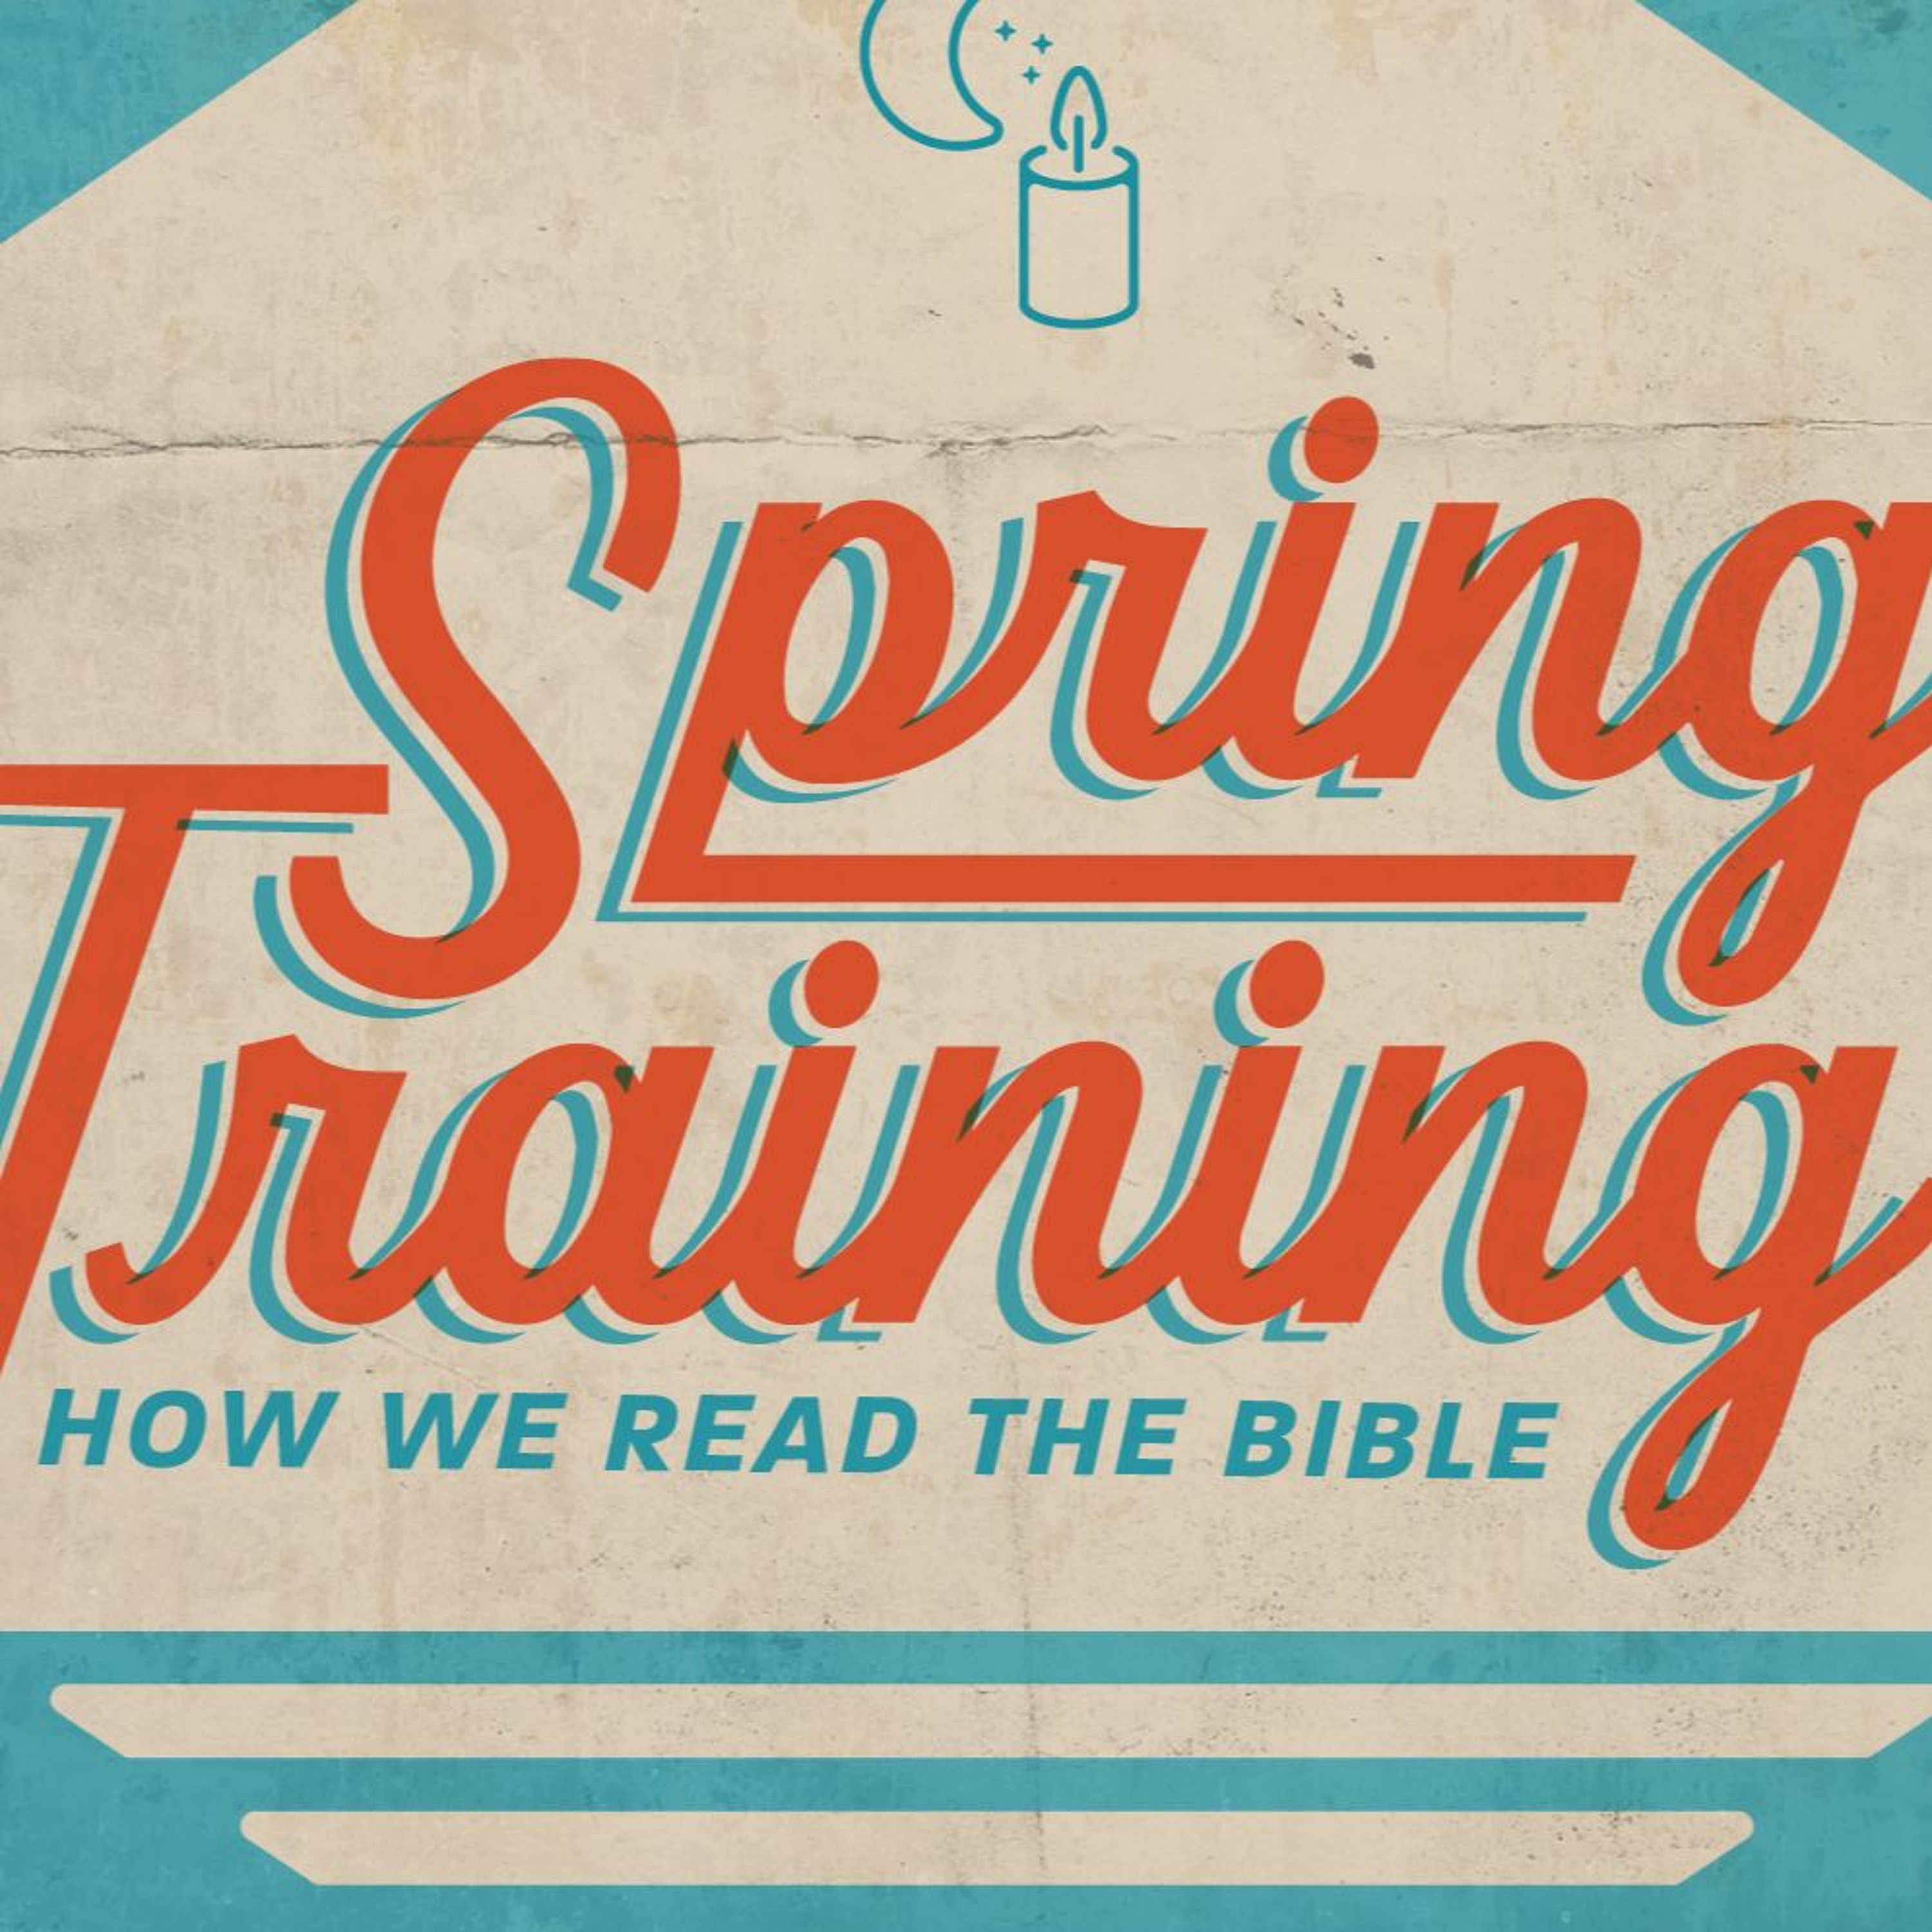 Spring Training - How We Read the Bible - A Source of Inspiration - Darin McWatters - 04 21 24